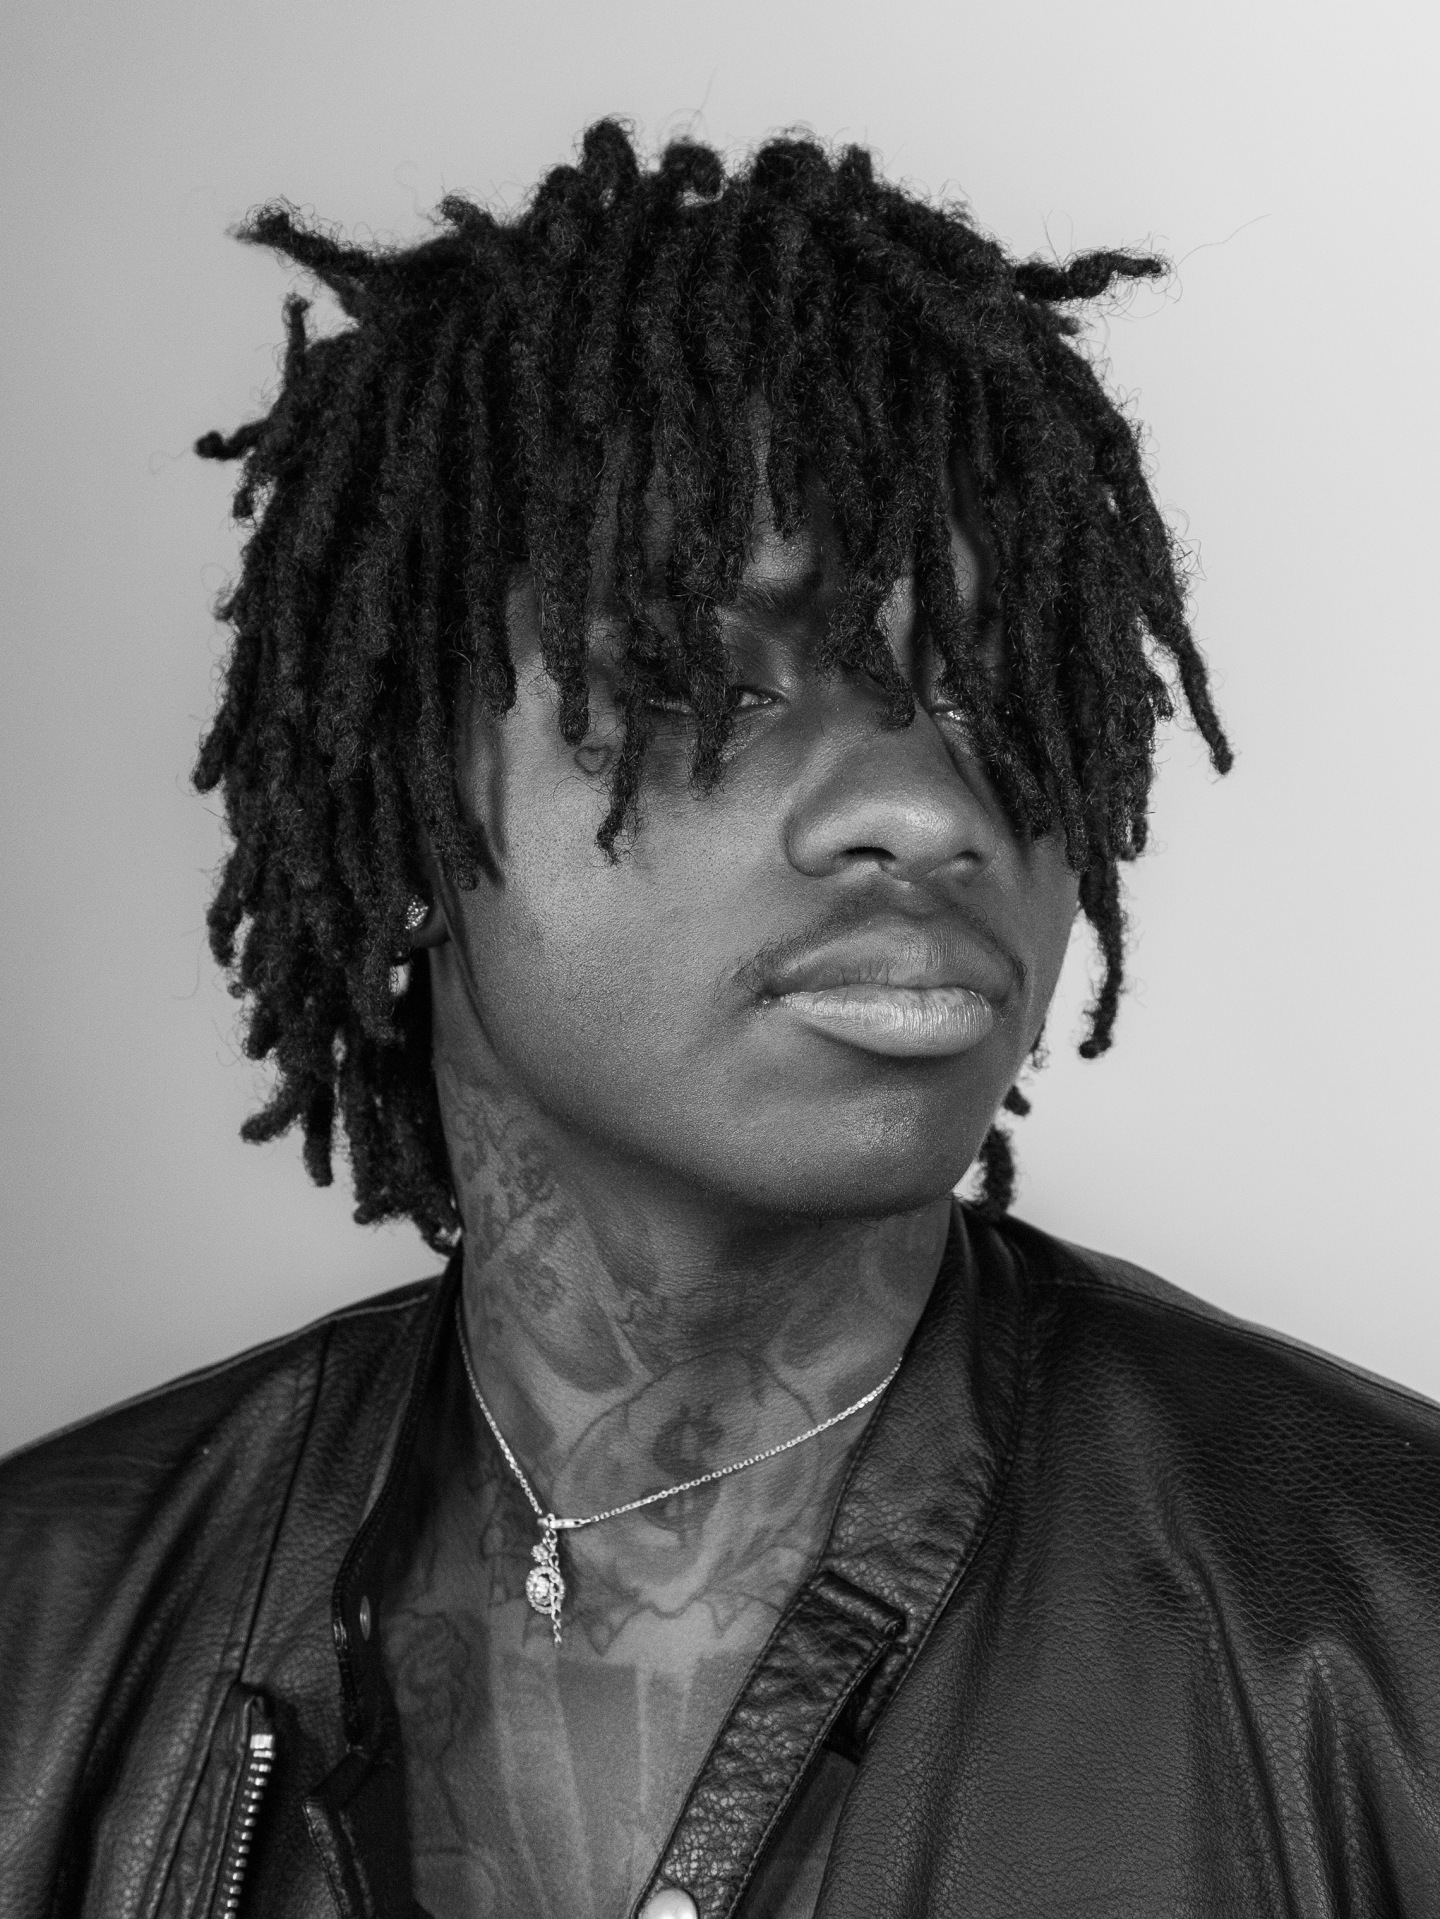 SahBabii is better off “unknown”